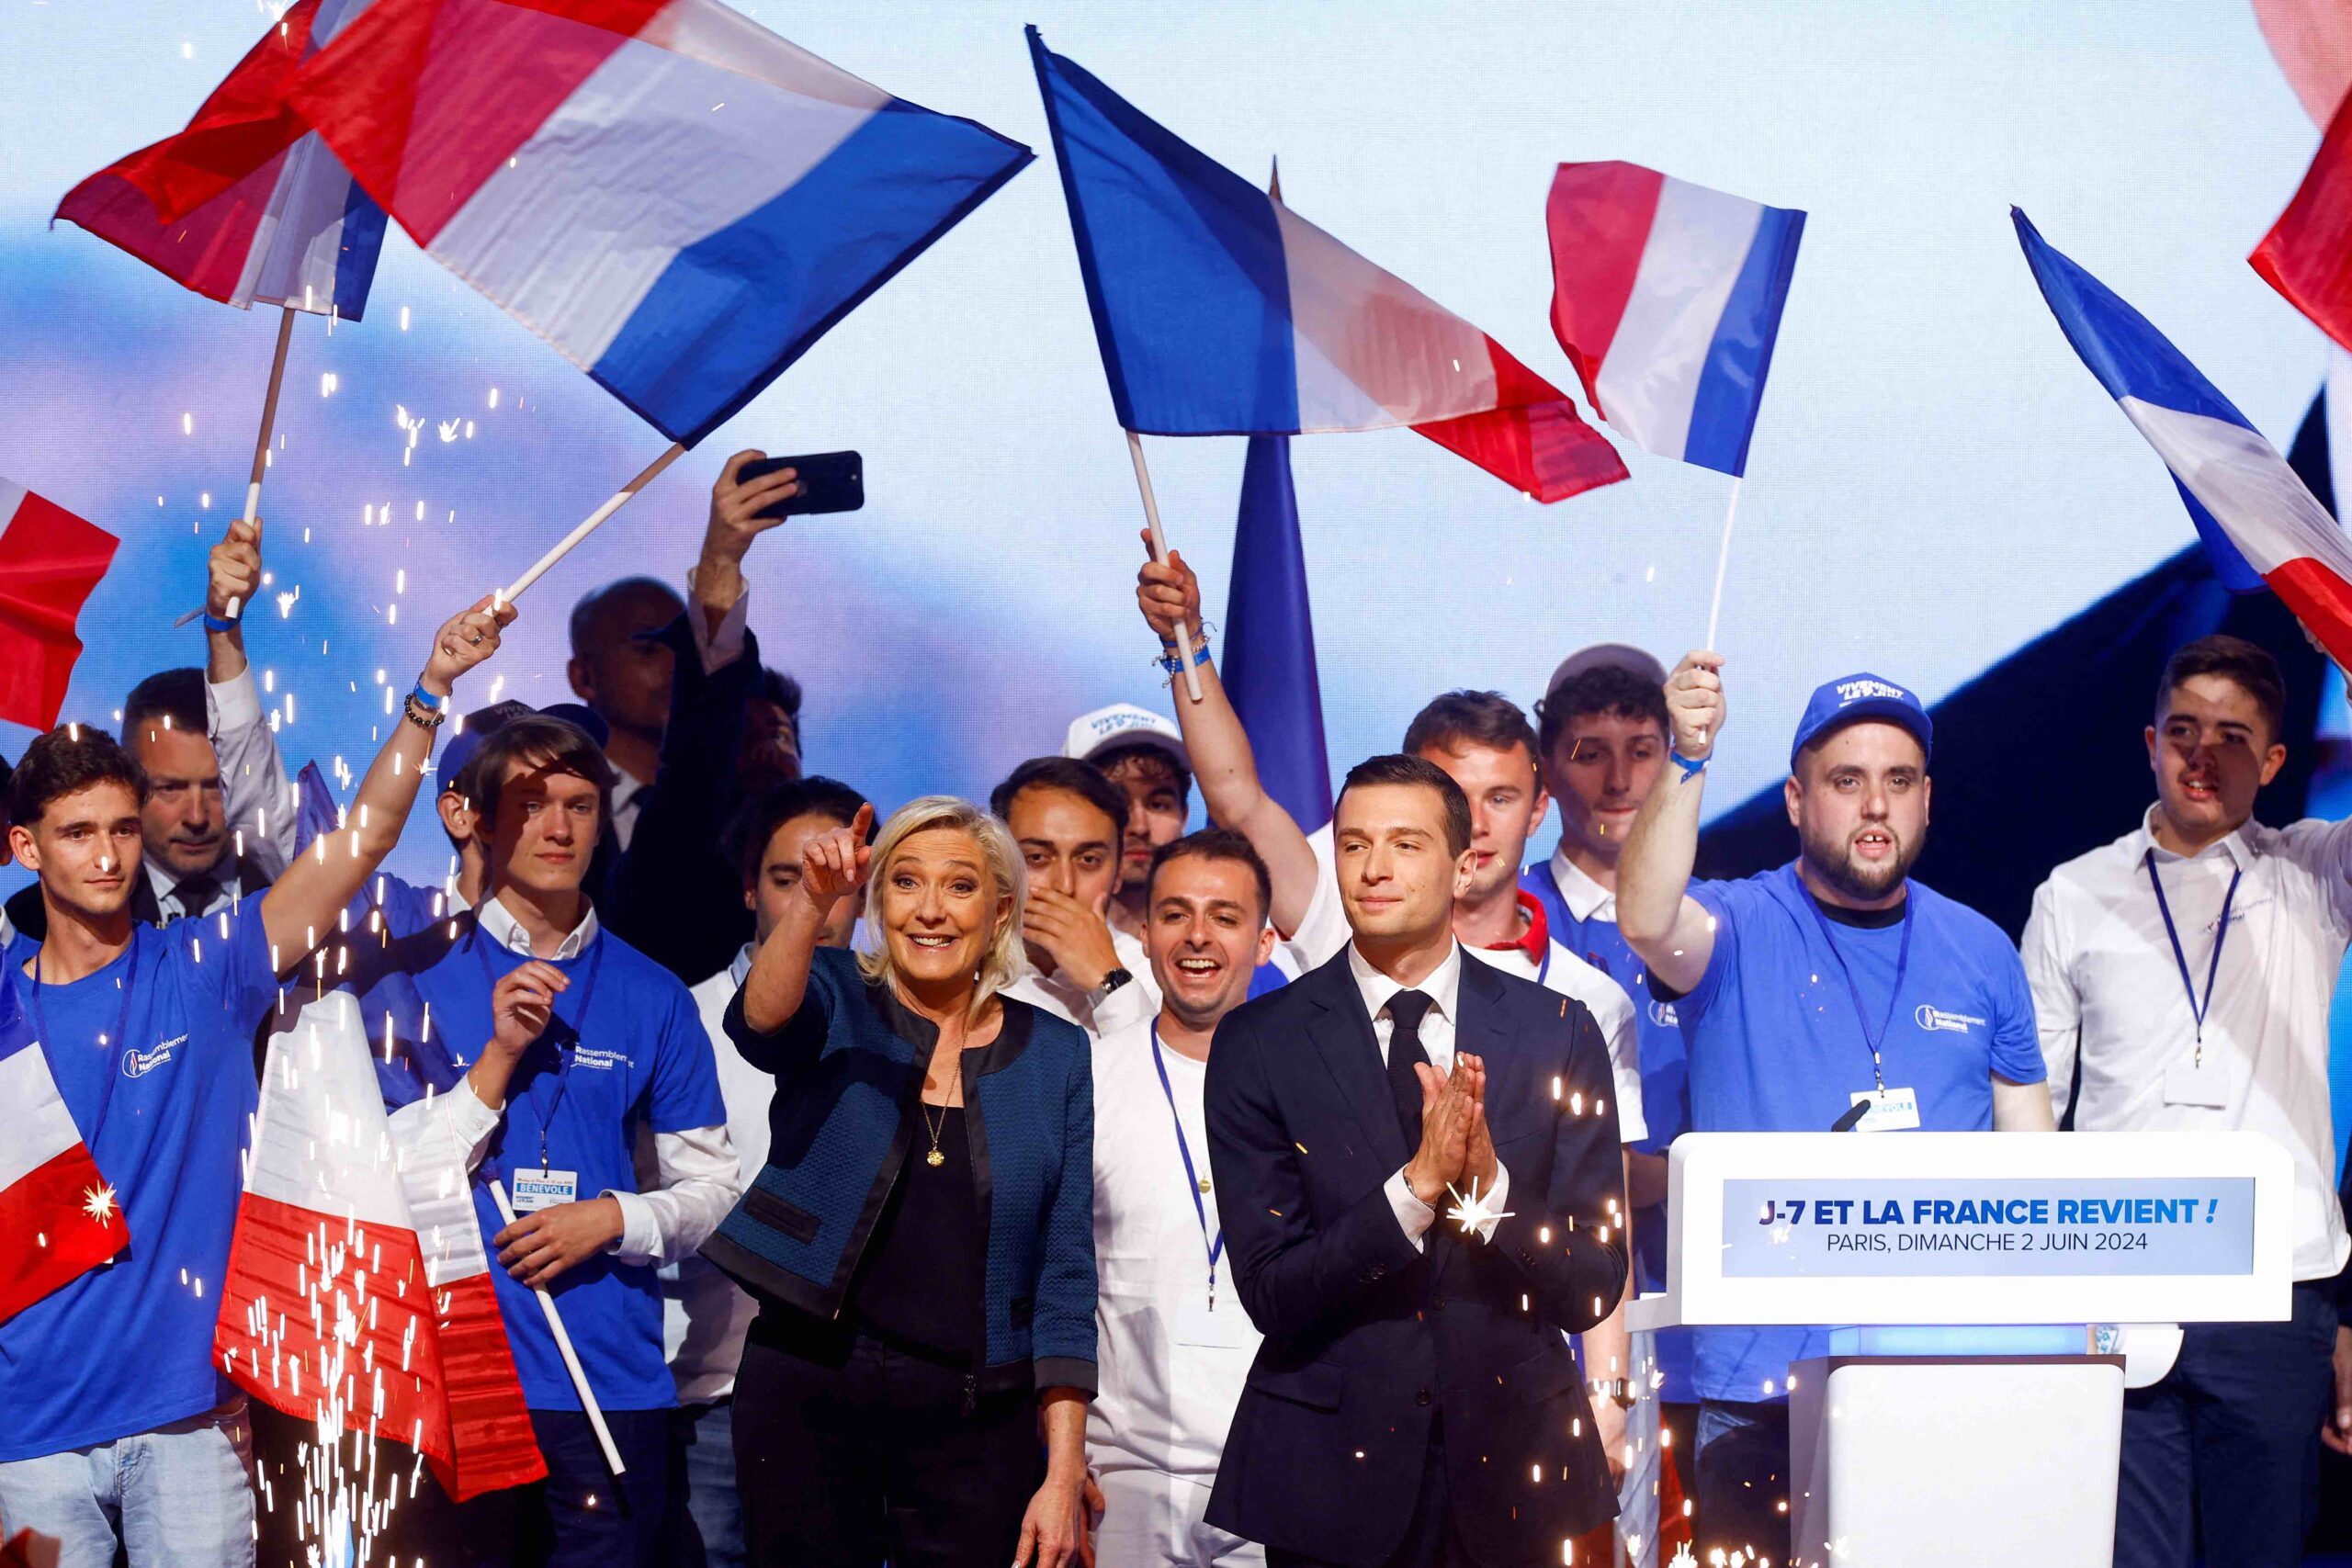 France’s election stokes far-right linked violence